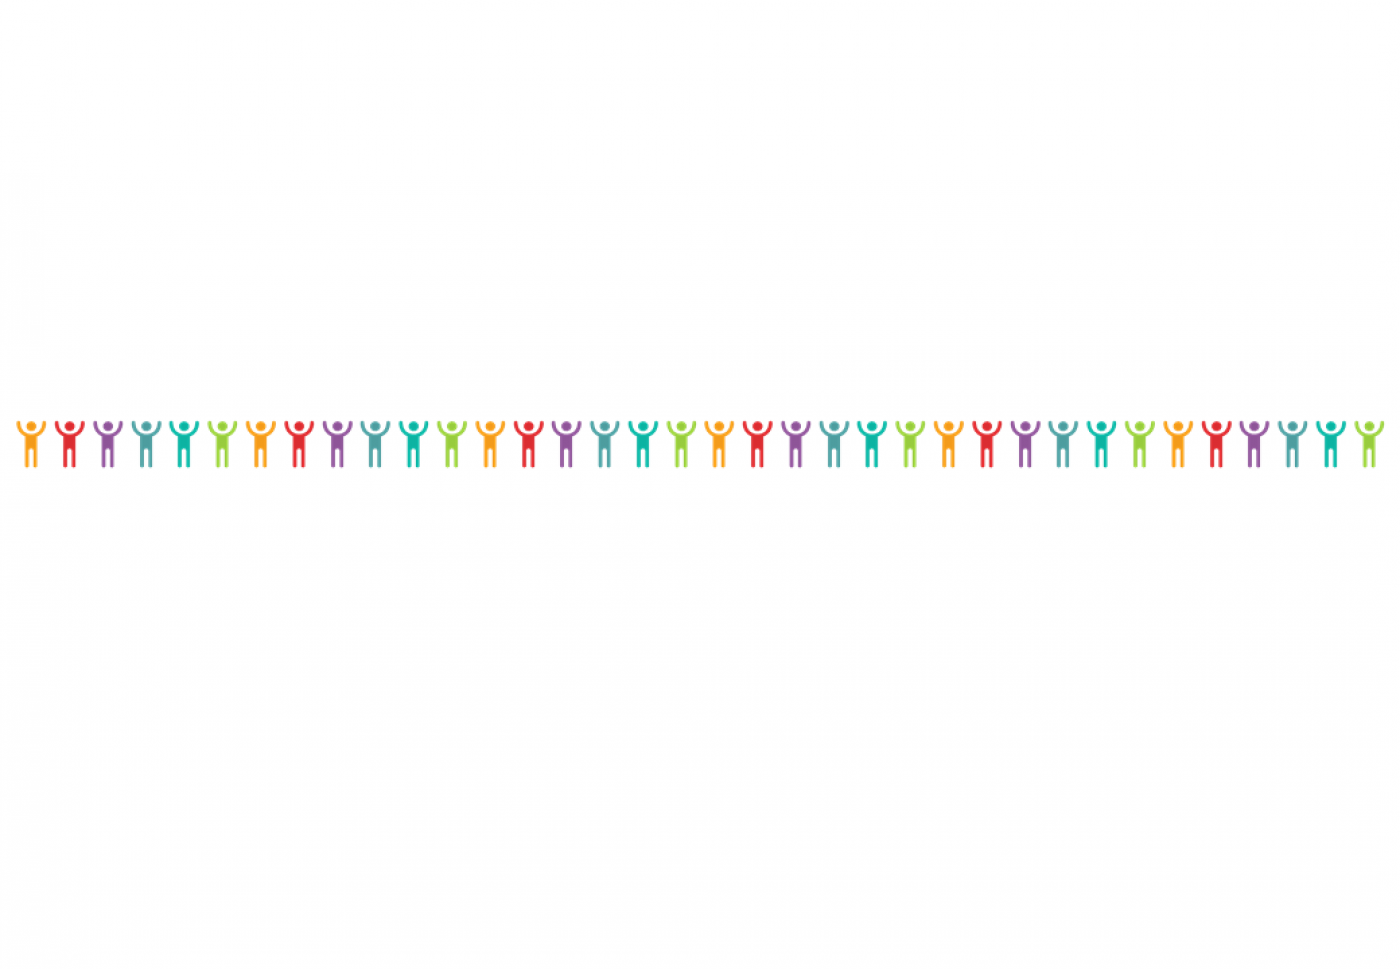 Image CHARS Chain Figures PNG file